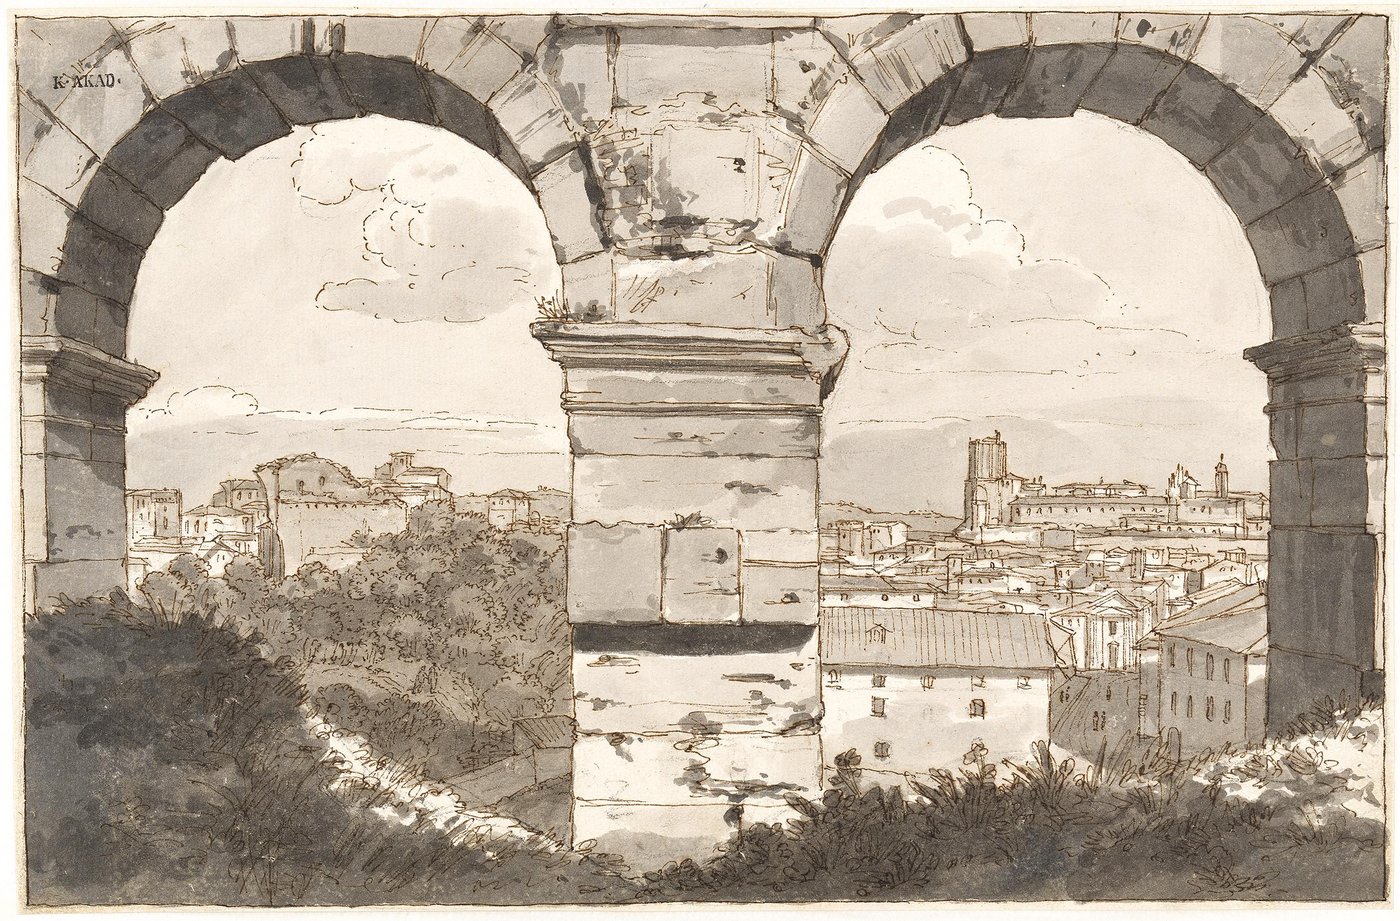 Pictured are two arcades of the Colosseum, providing a view of Rome in the background of the image.